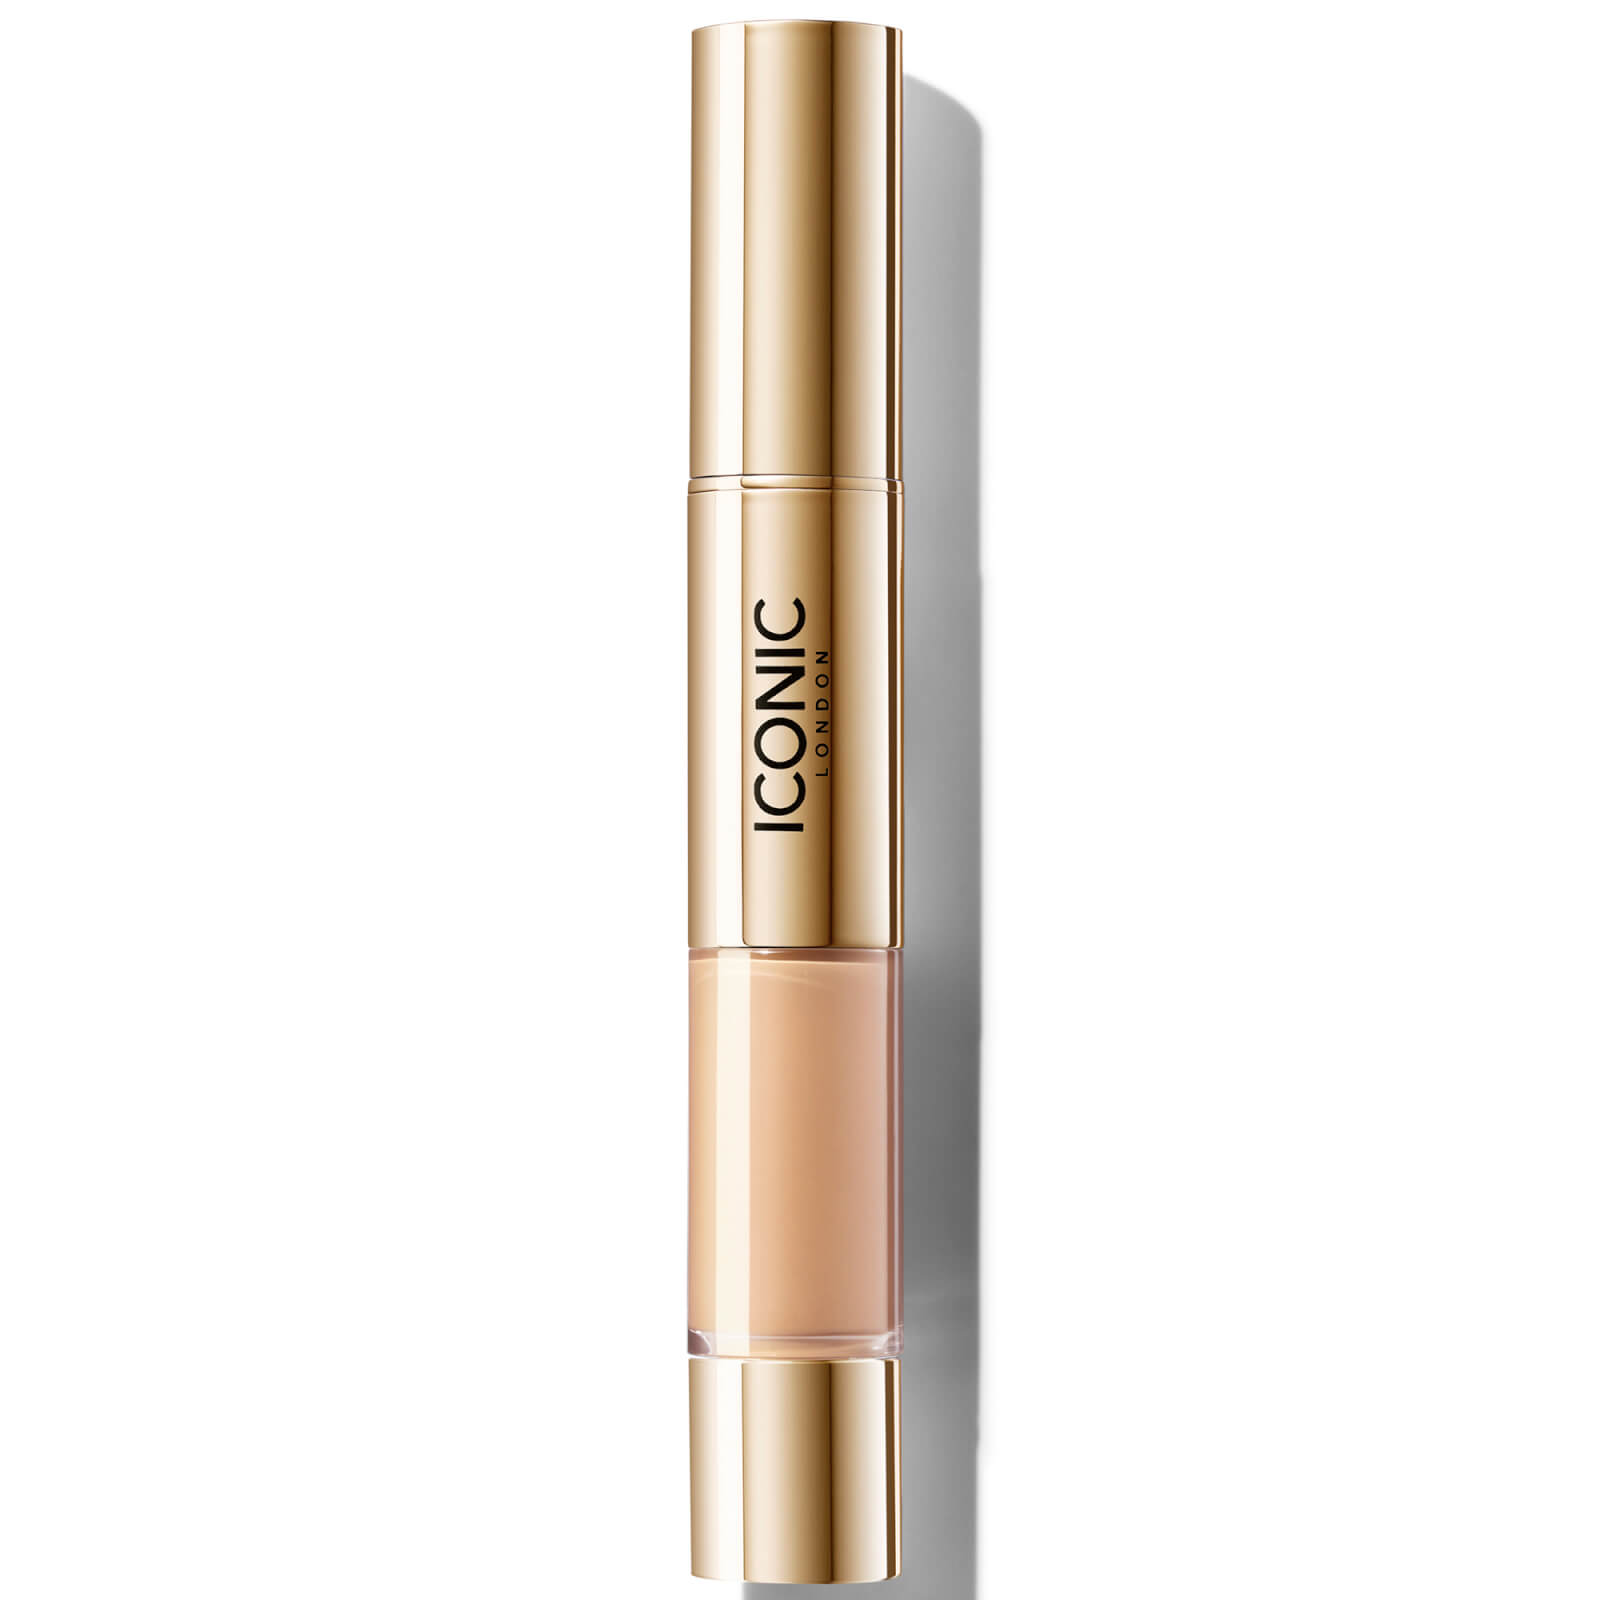 Iconic London Radiant Concealer And Brightening Duo - Warm Light